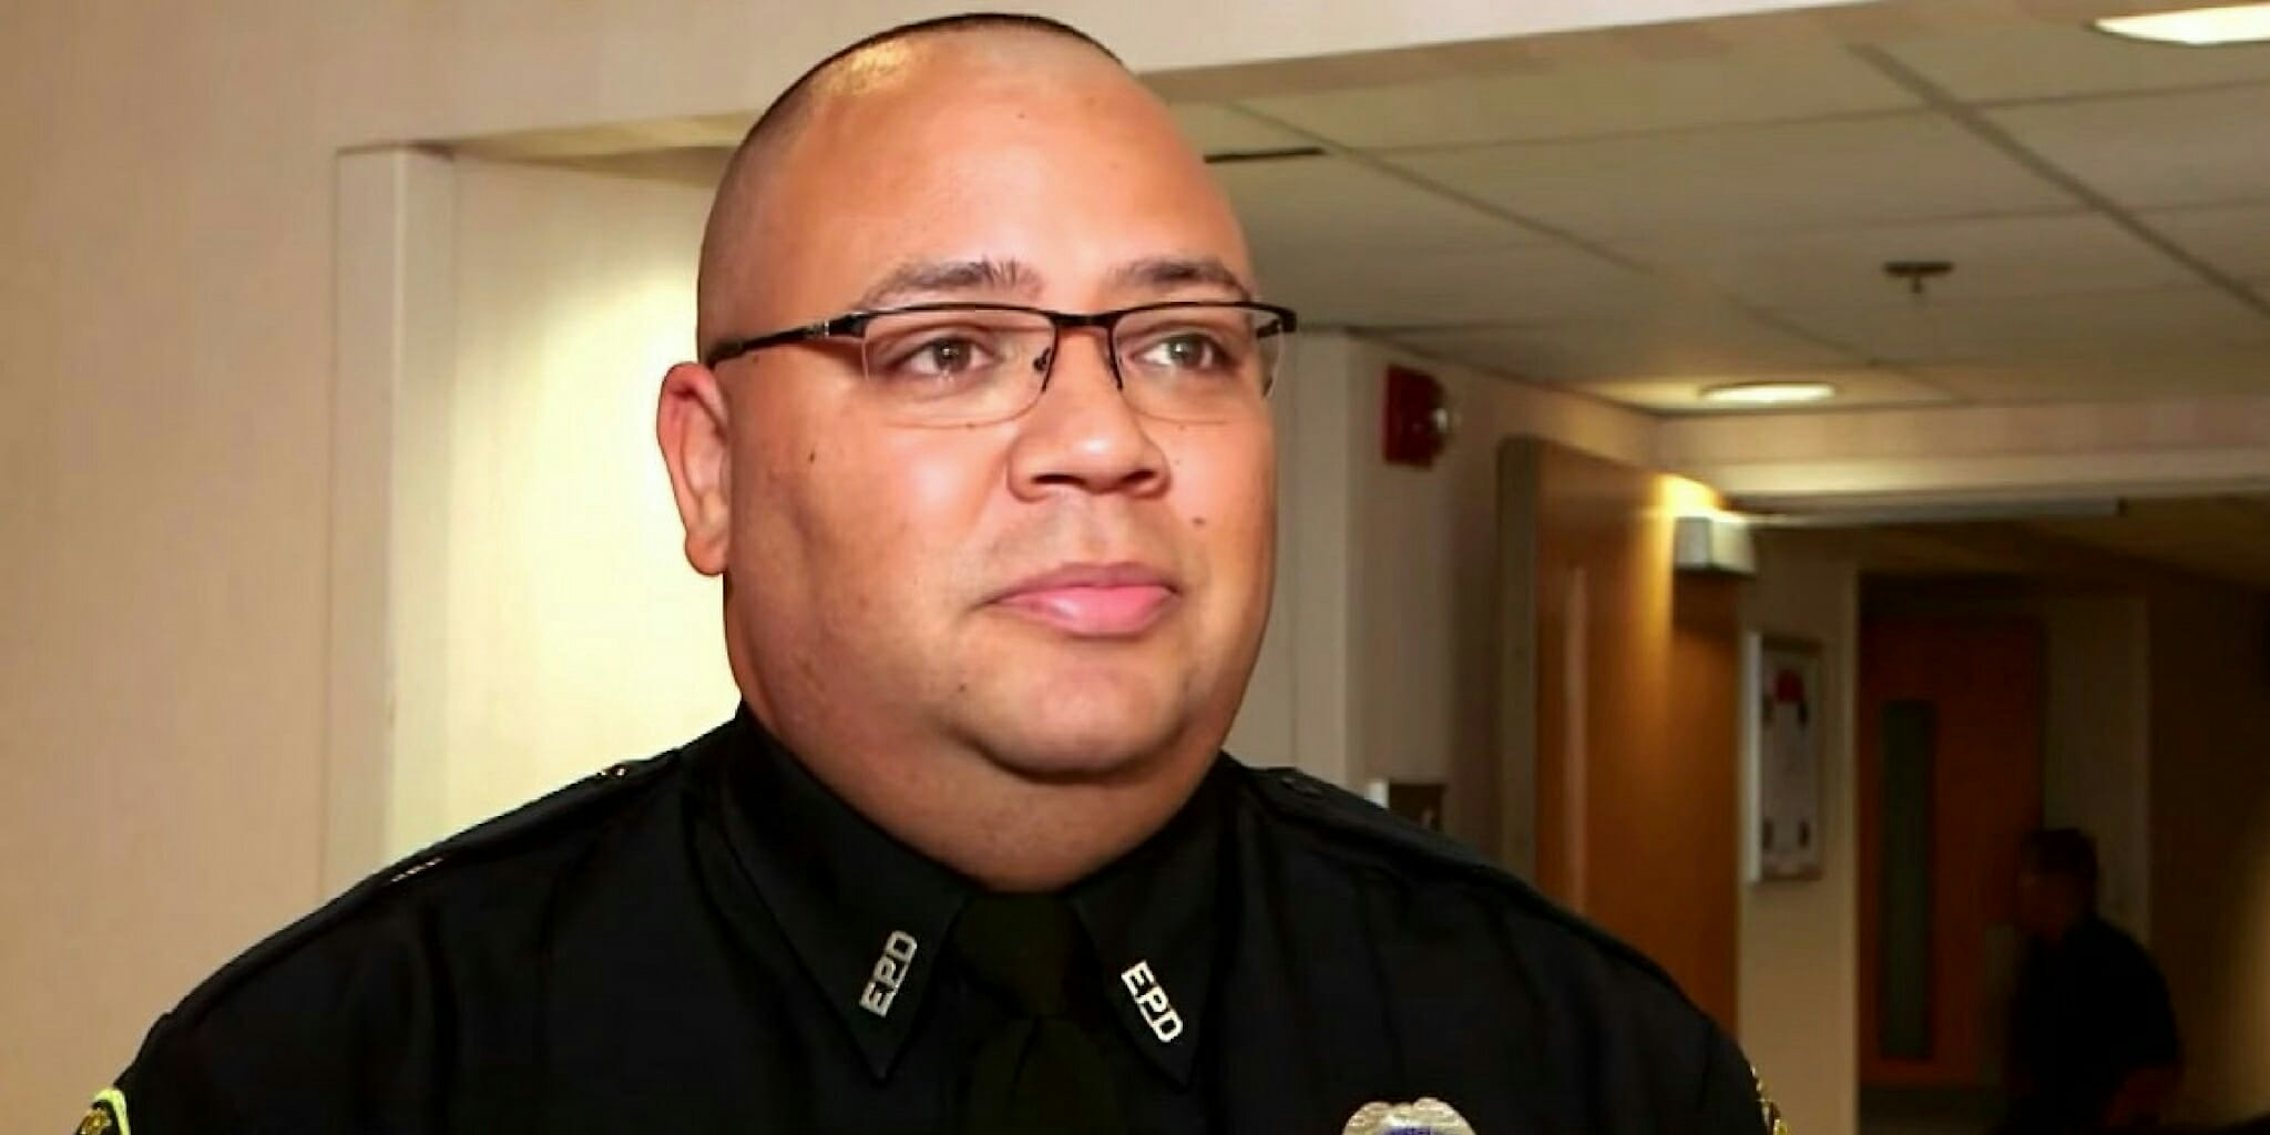 Officer Omar Delgado, who saved a man during the Orlando Pulse shooting, is being fired